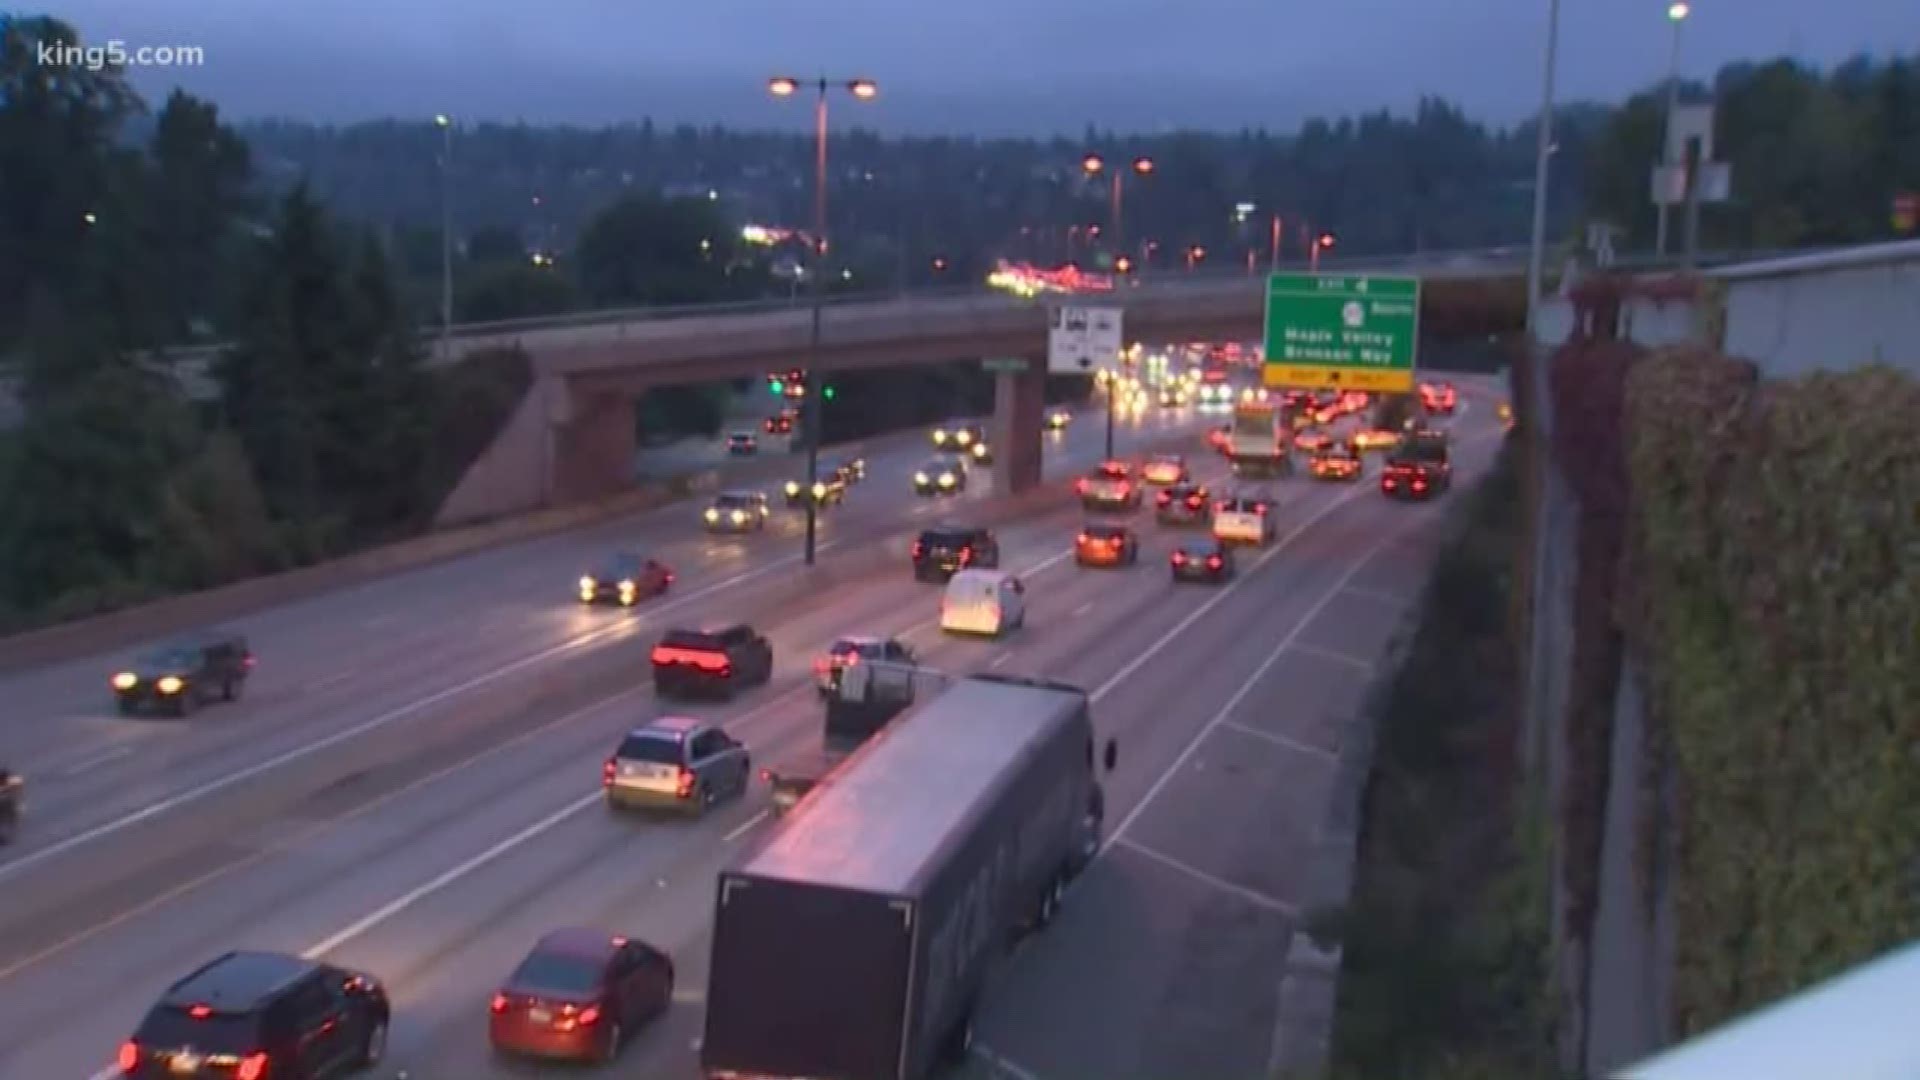 Washington State DOT is looking at ways to improve the S-curves between Renton and Bellevue.